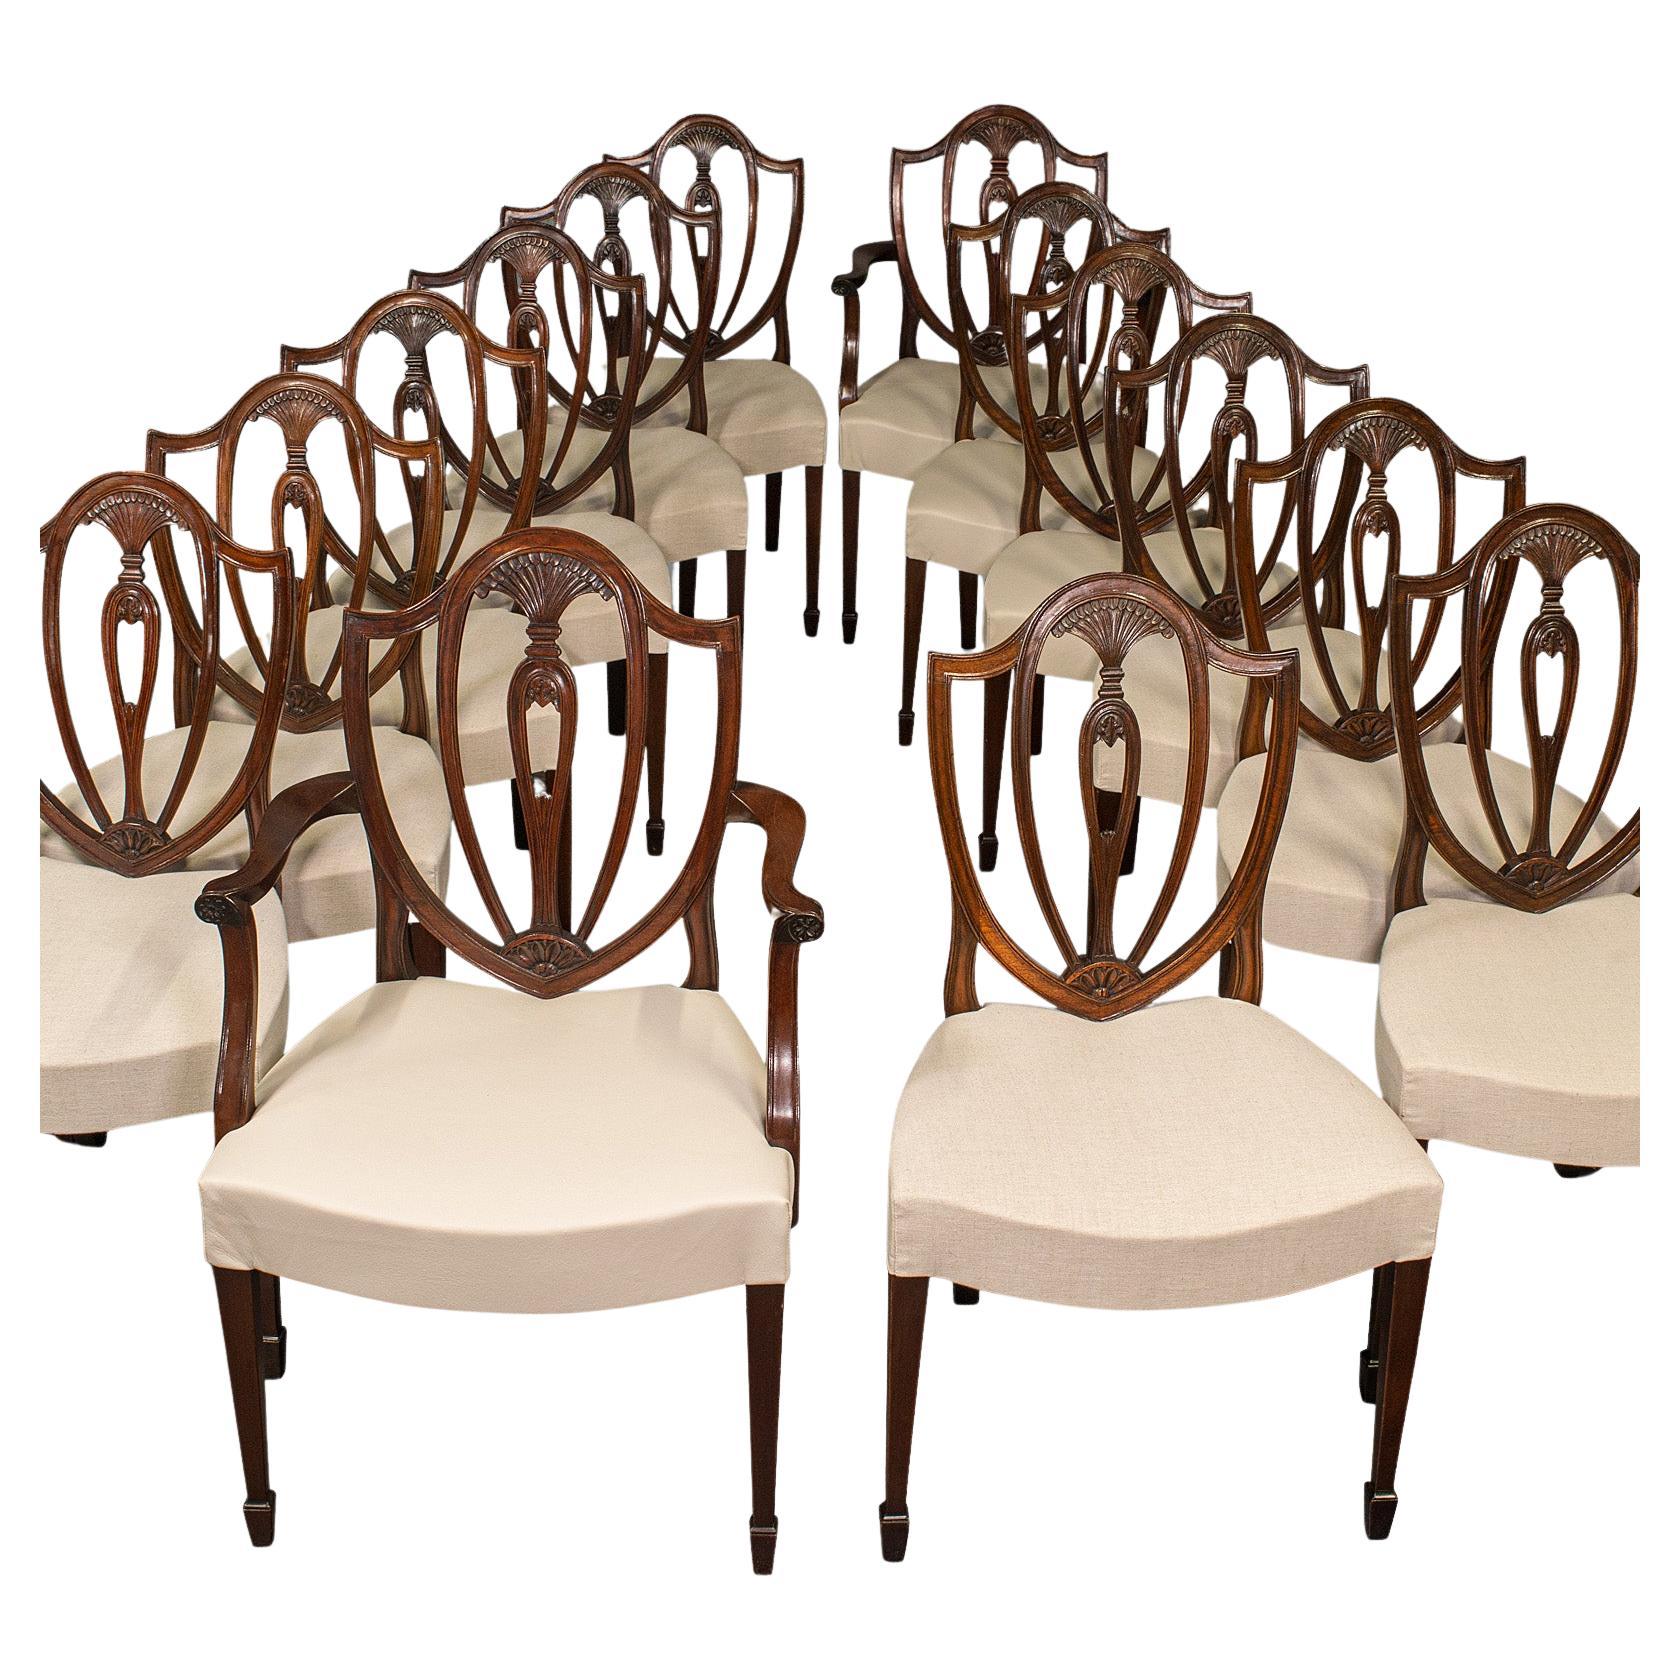 Long Set of 14 Antique Dining Chairs, English, Chippendale Revival, Victorian